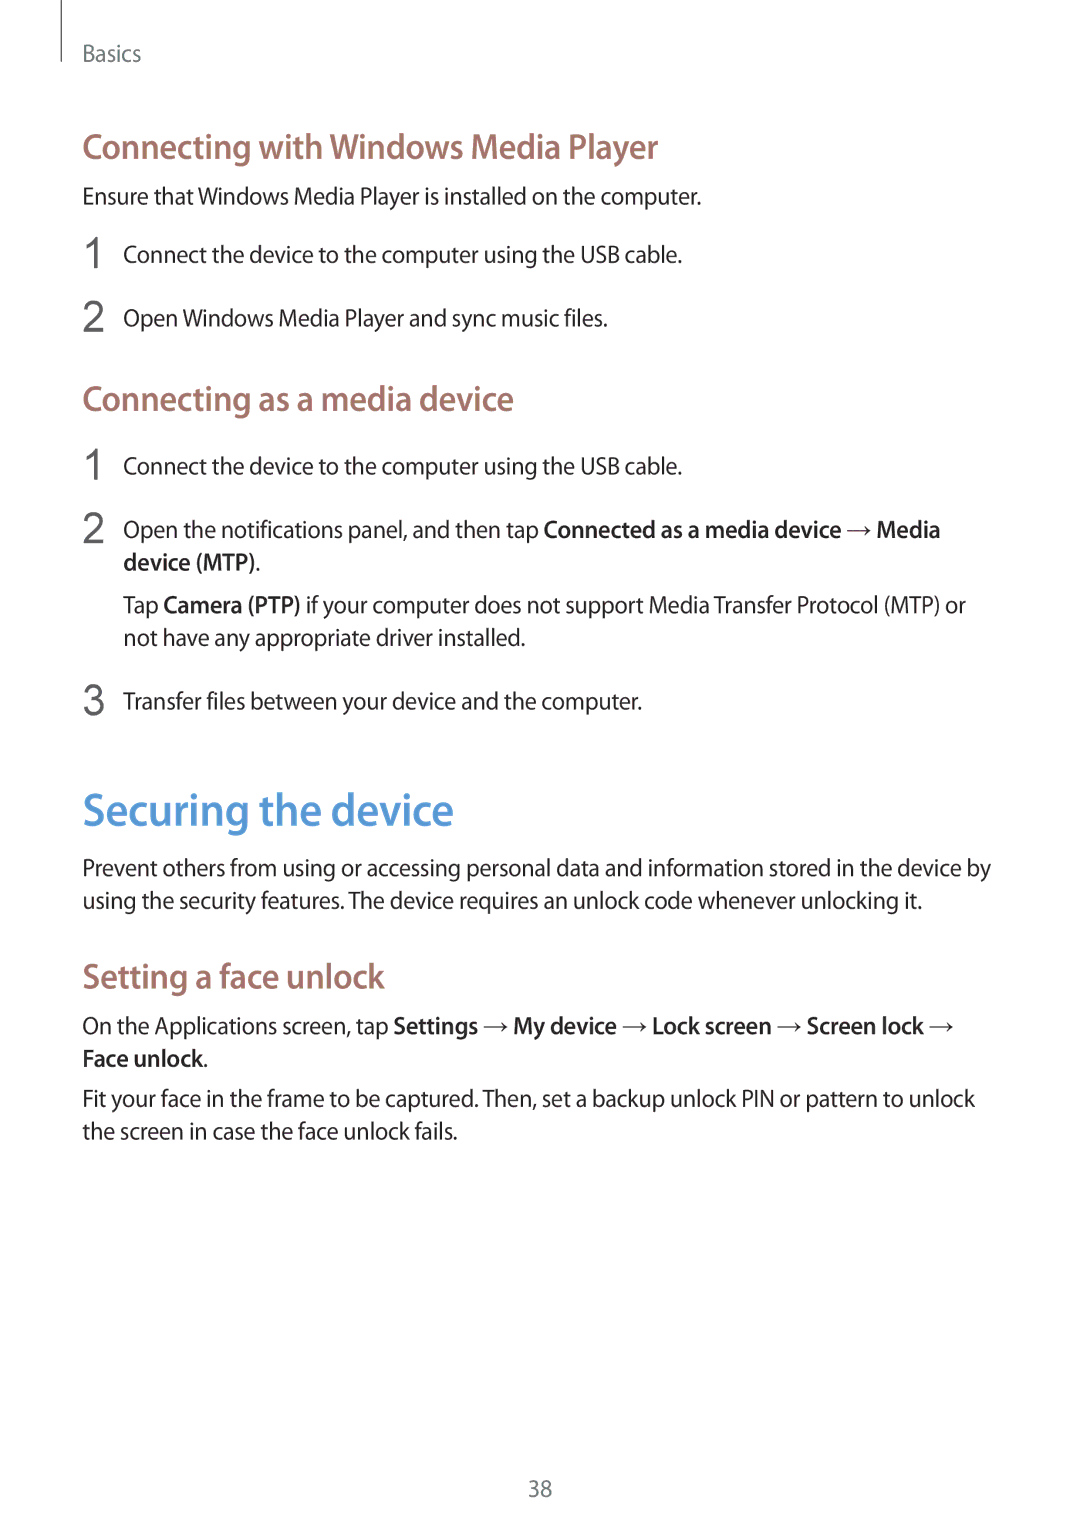 Samsung SM-G386FZKASEB Securing the device, Connecting with Windows Media Player, Connecting as a media device, Device MTP 